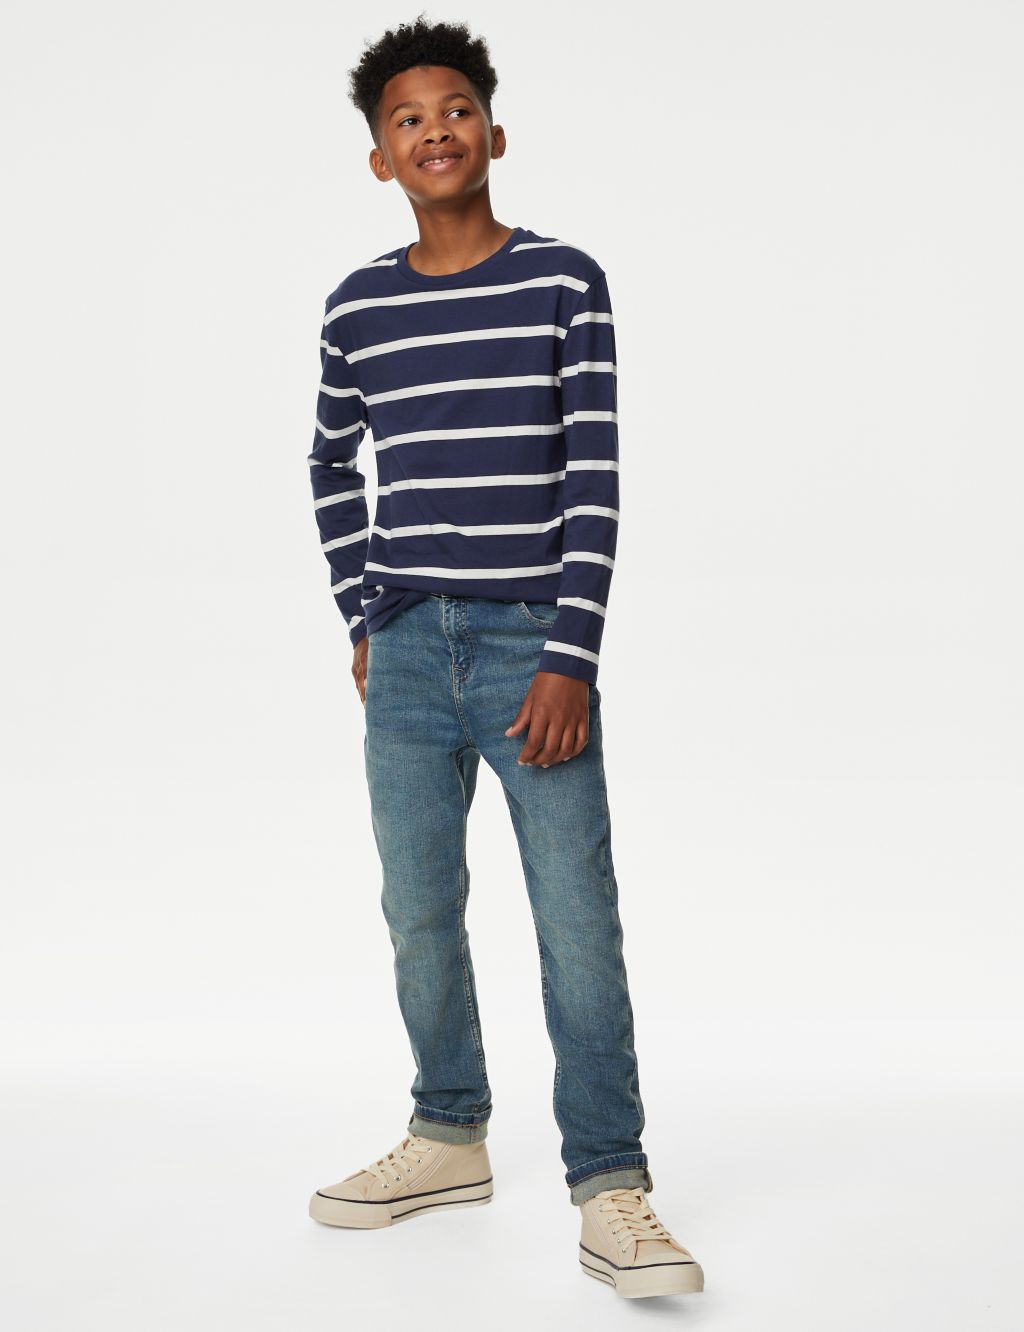 The Jones Straight Fit Cotton with Stretch Jeans (6-16 Yrs) image 1